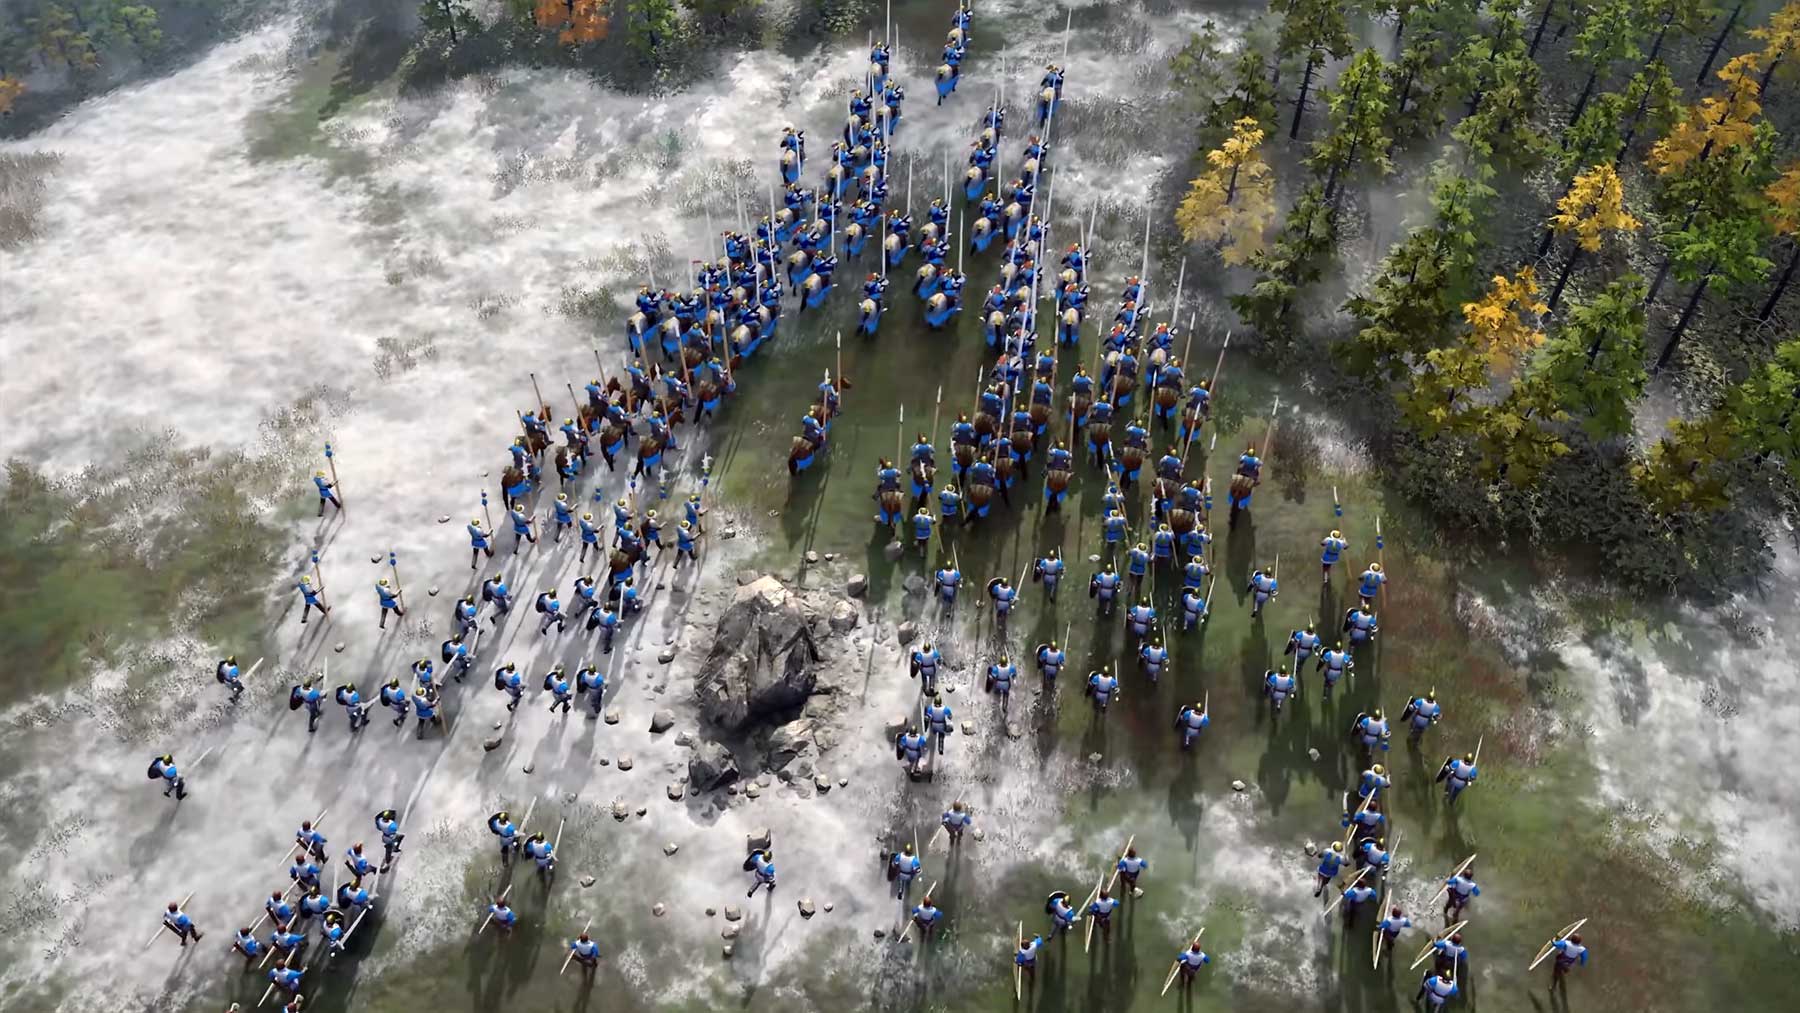 Age of Empires IV: Gameplay Trailer